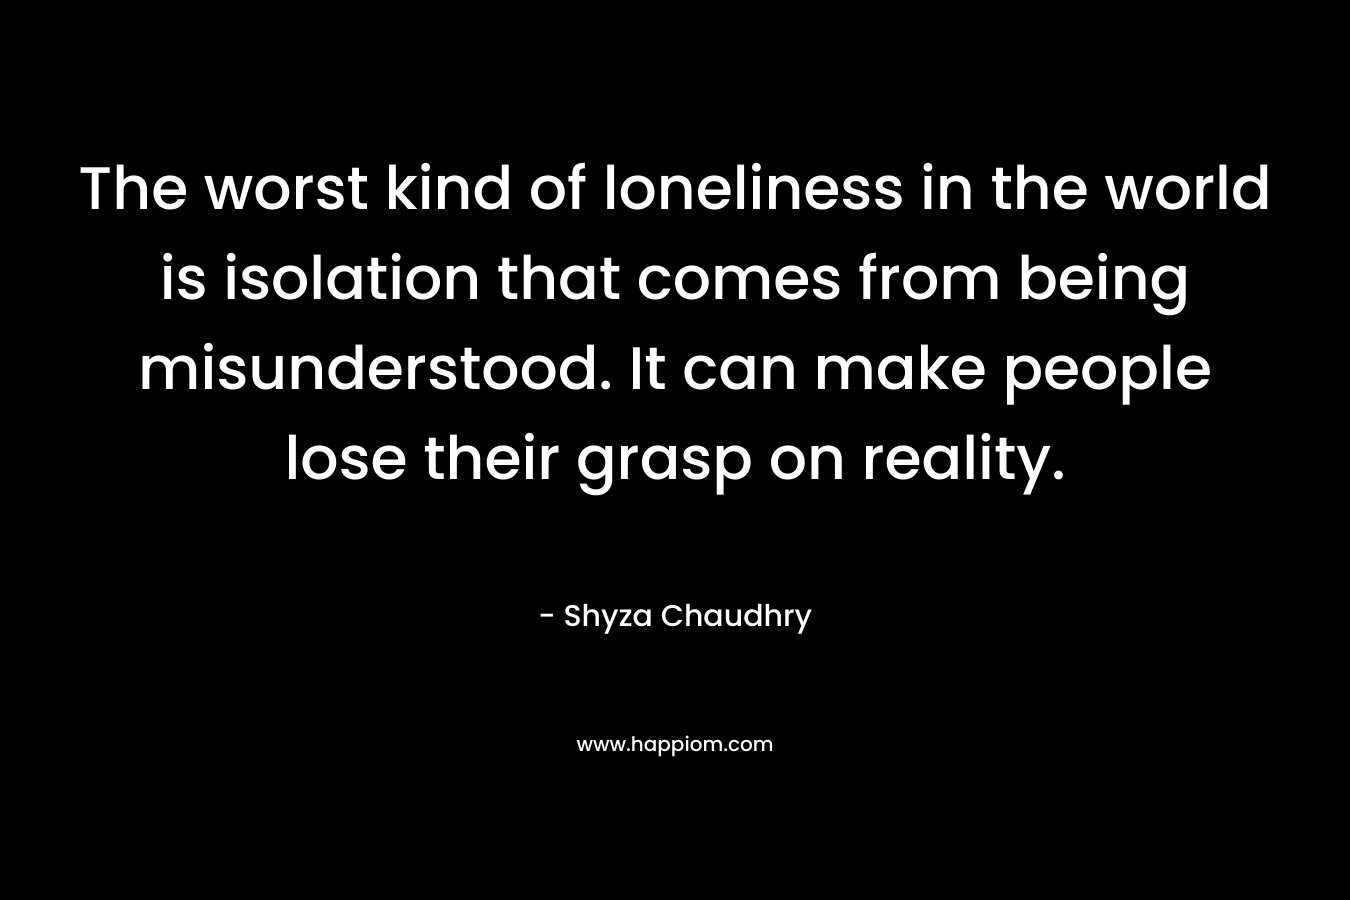 The worst kind of loneliness in the world is isolation that comes from being misunderstood. It can make people lose their grasp on reality.